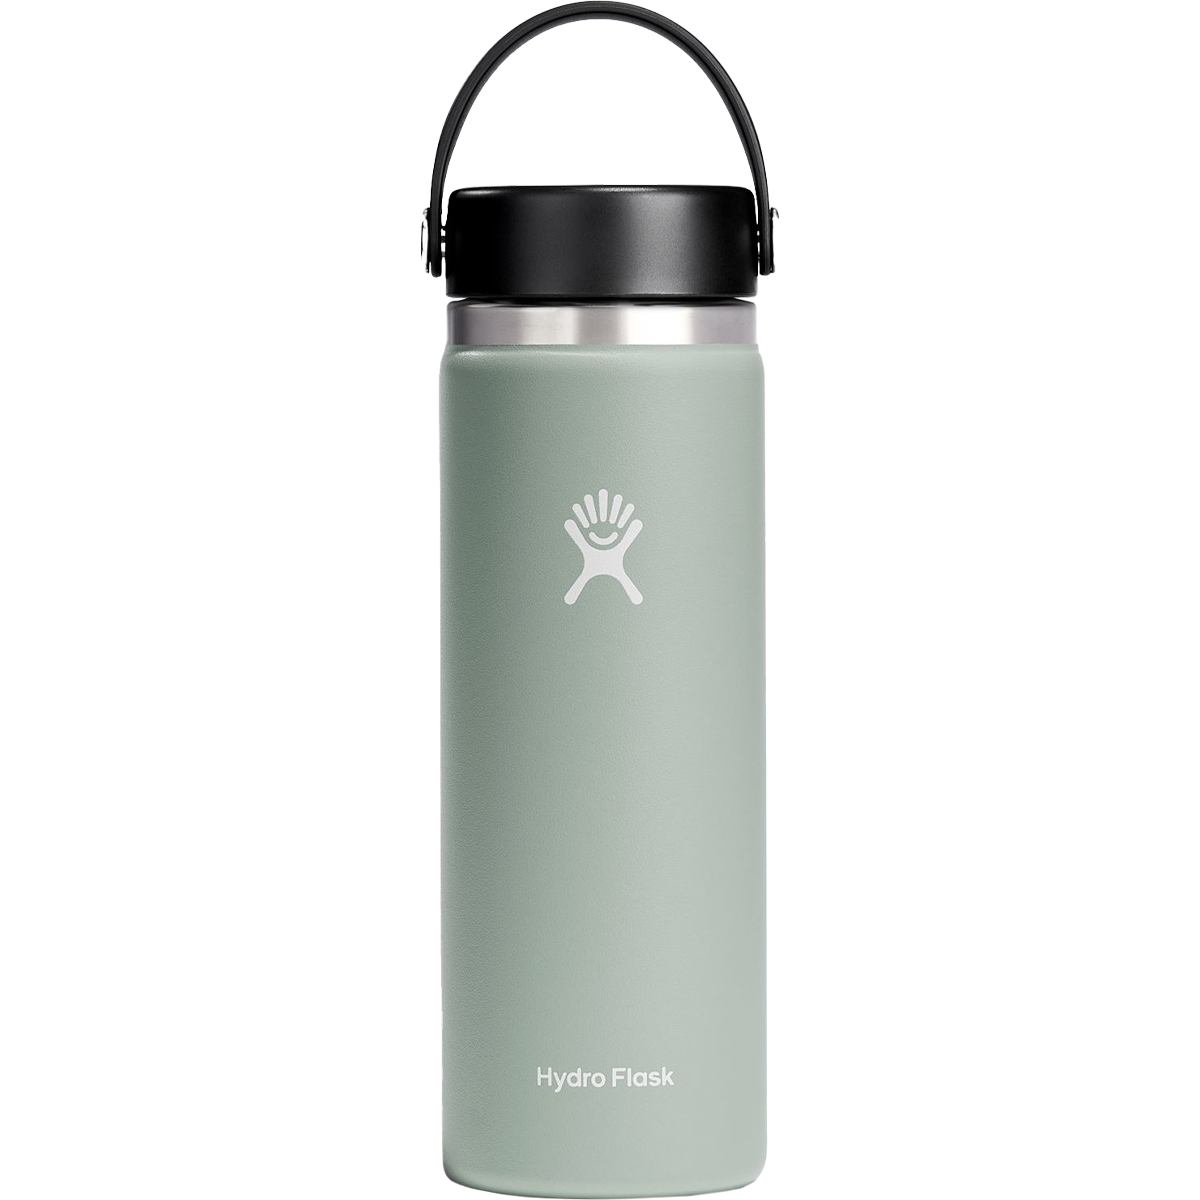  Owala FreeSip 32oz Insulated Stainless Steel Water Bottle with  Silicone Boot - Keeps Drinks Cold Up to 24 Hours : Sports & Outdoors